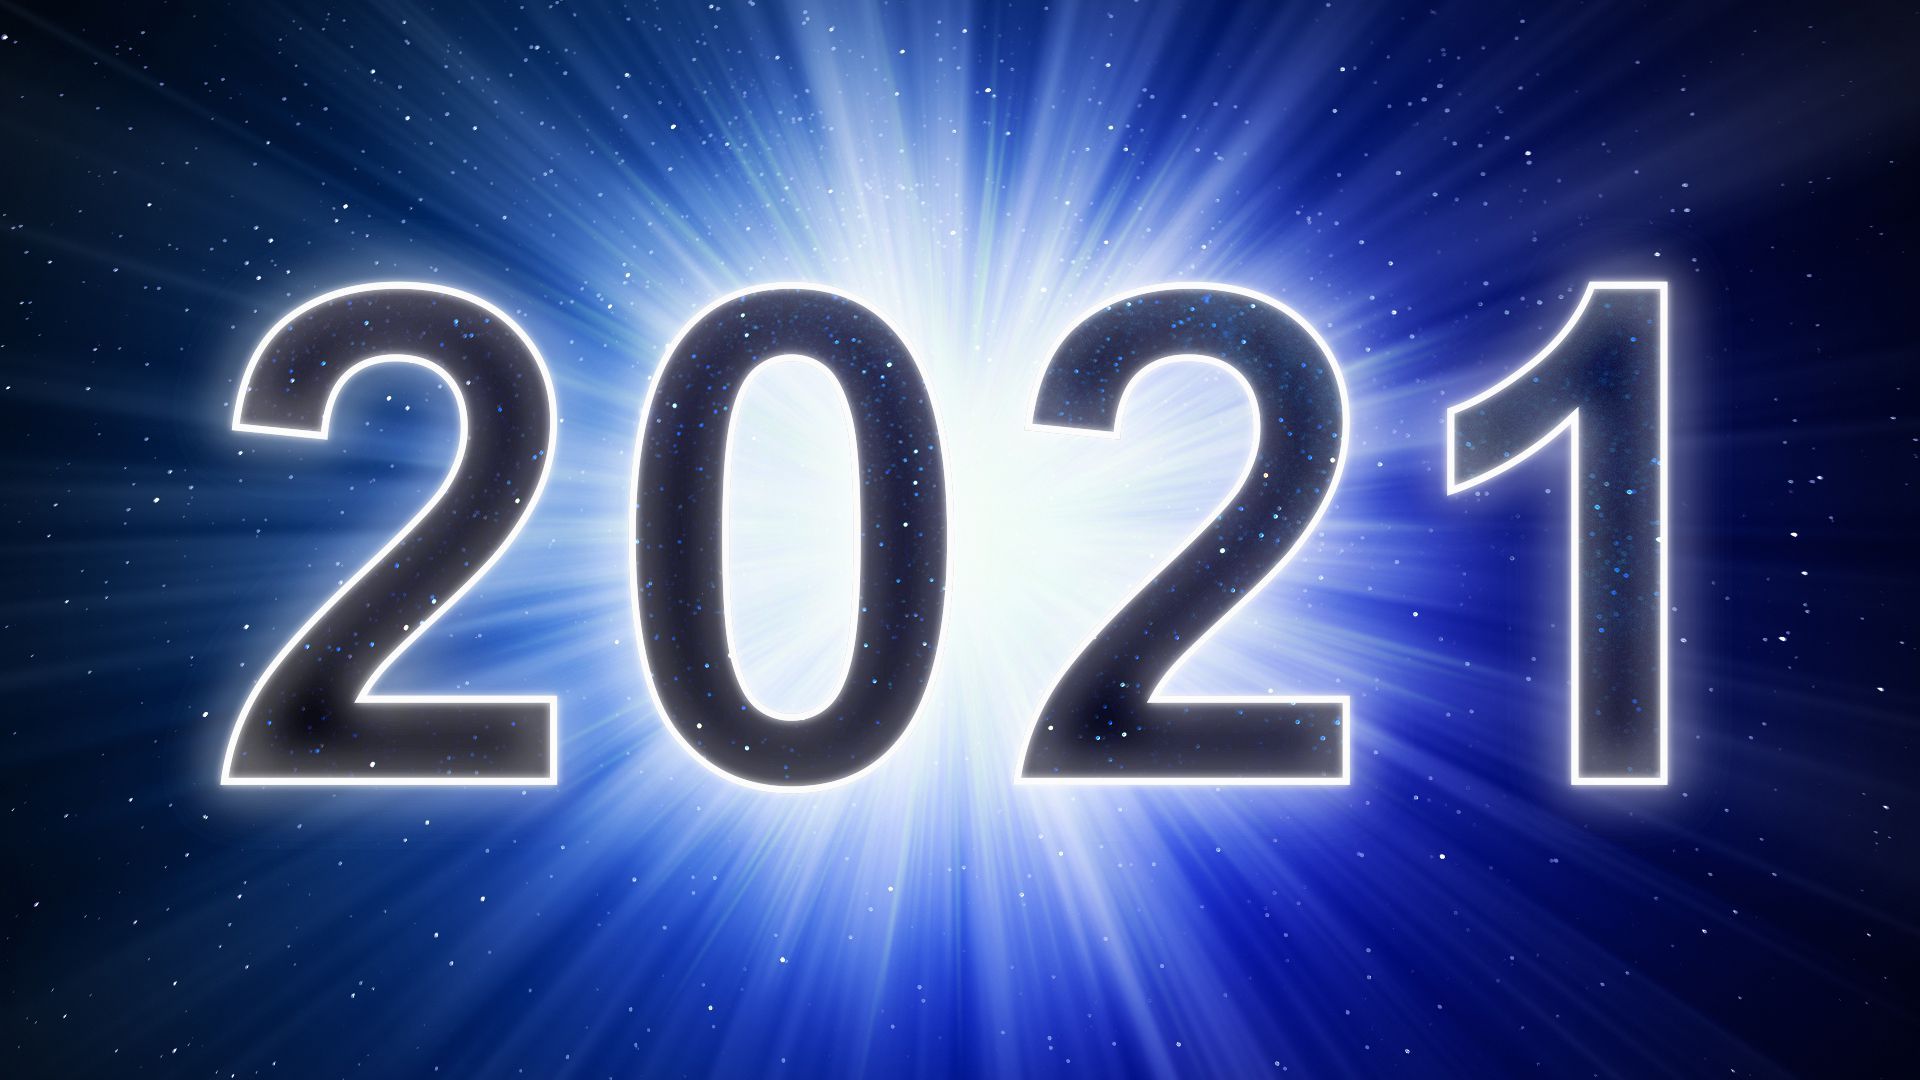 Illustration of the number 2021 in space backed by a burst of light